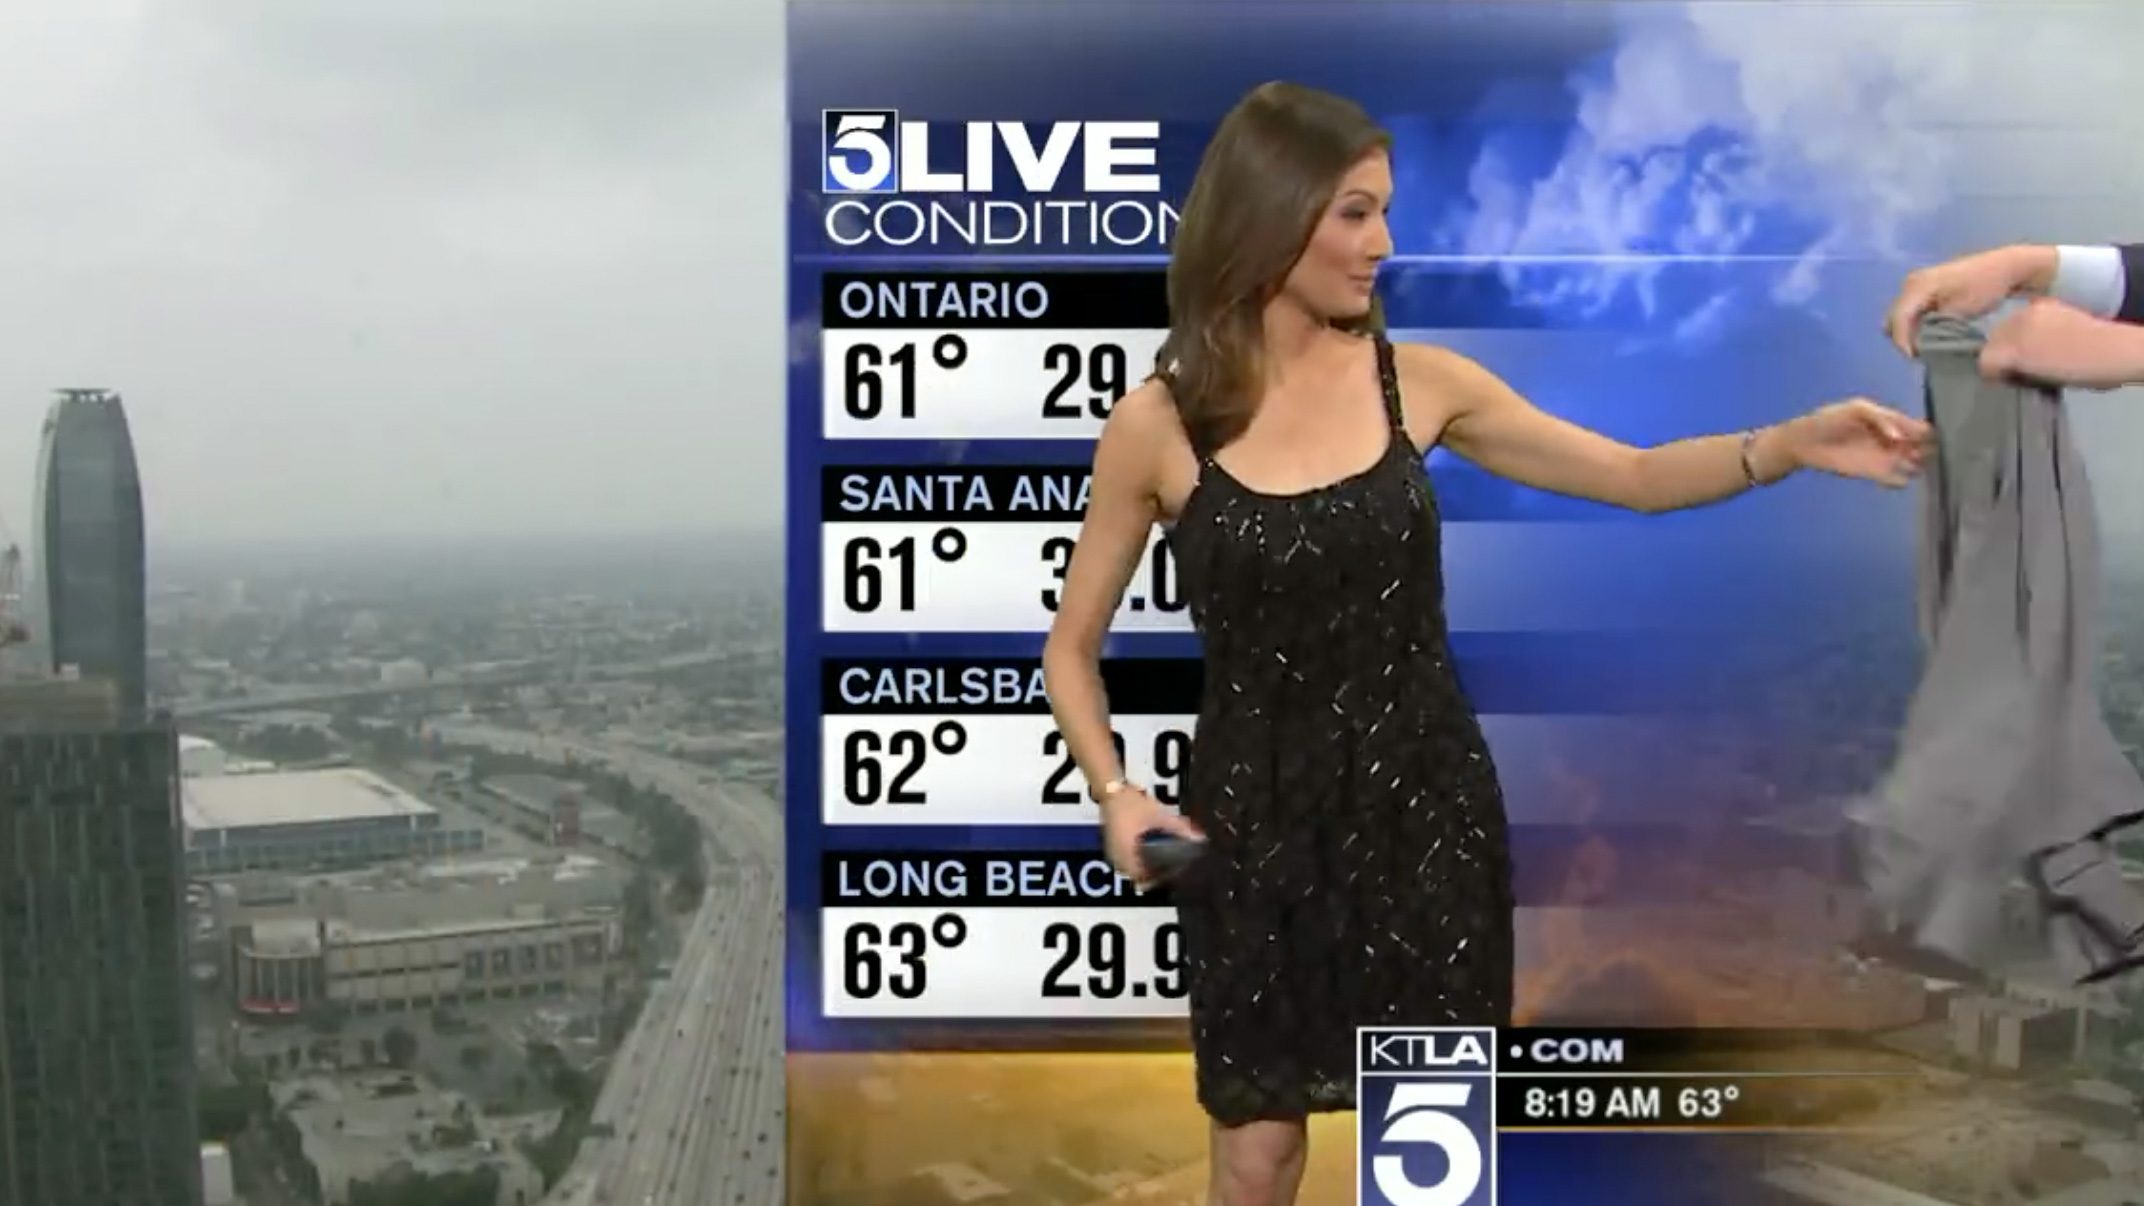 LA weather reporter asked to cover up on air: workplace sexism?